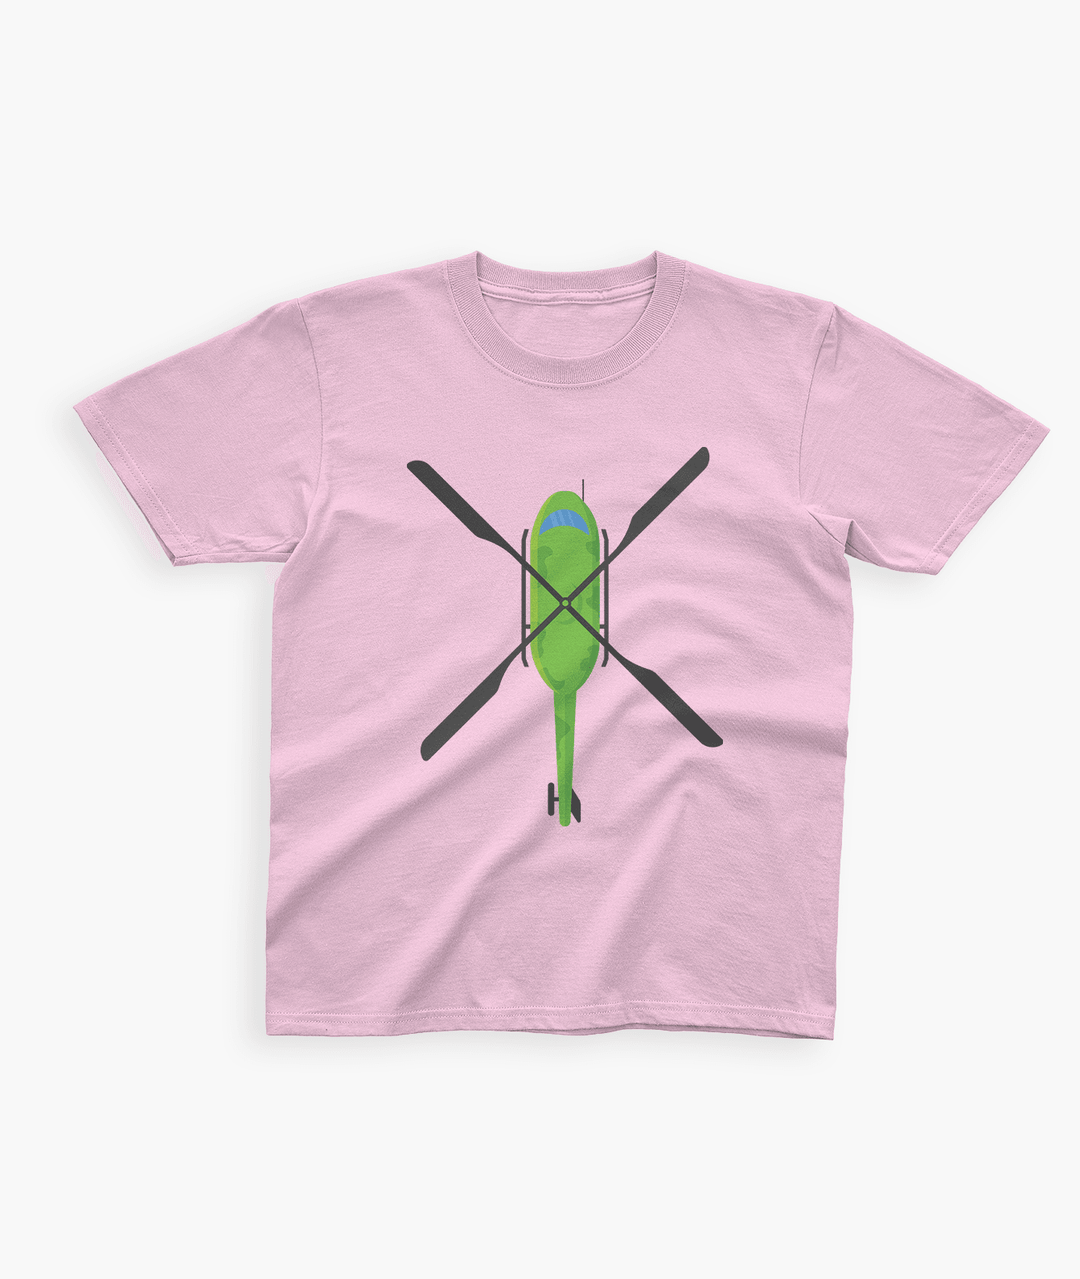 Helicopter Kids T-Shirt - Aero Armour